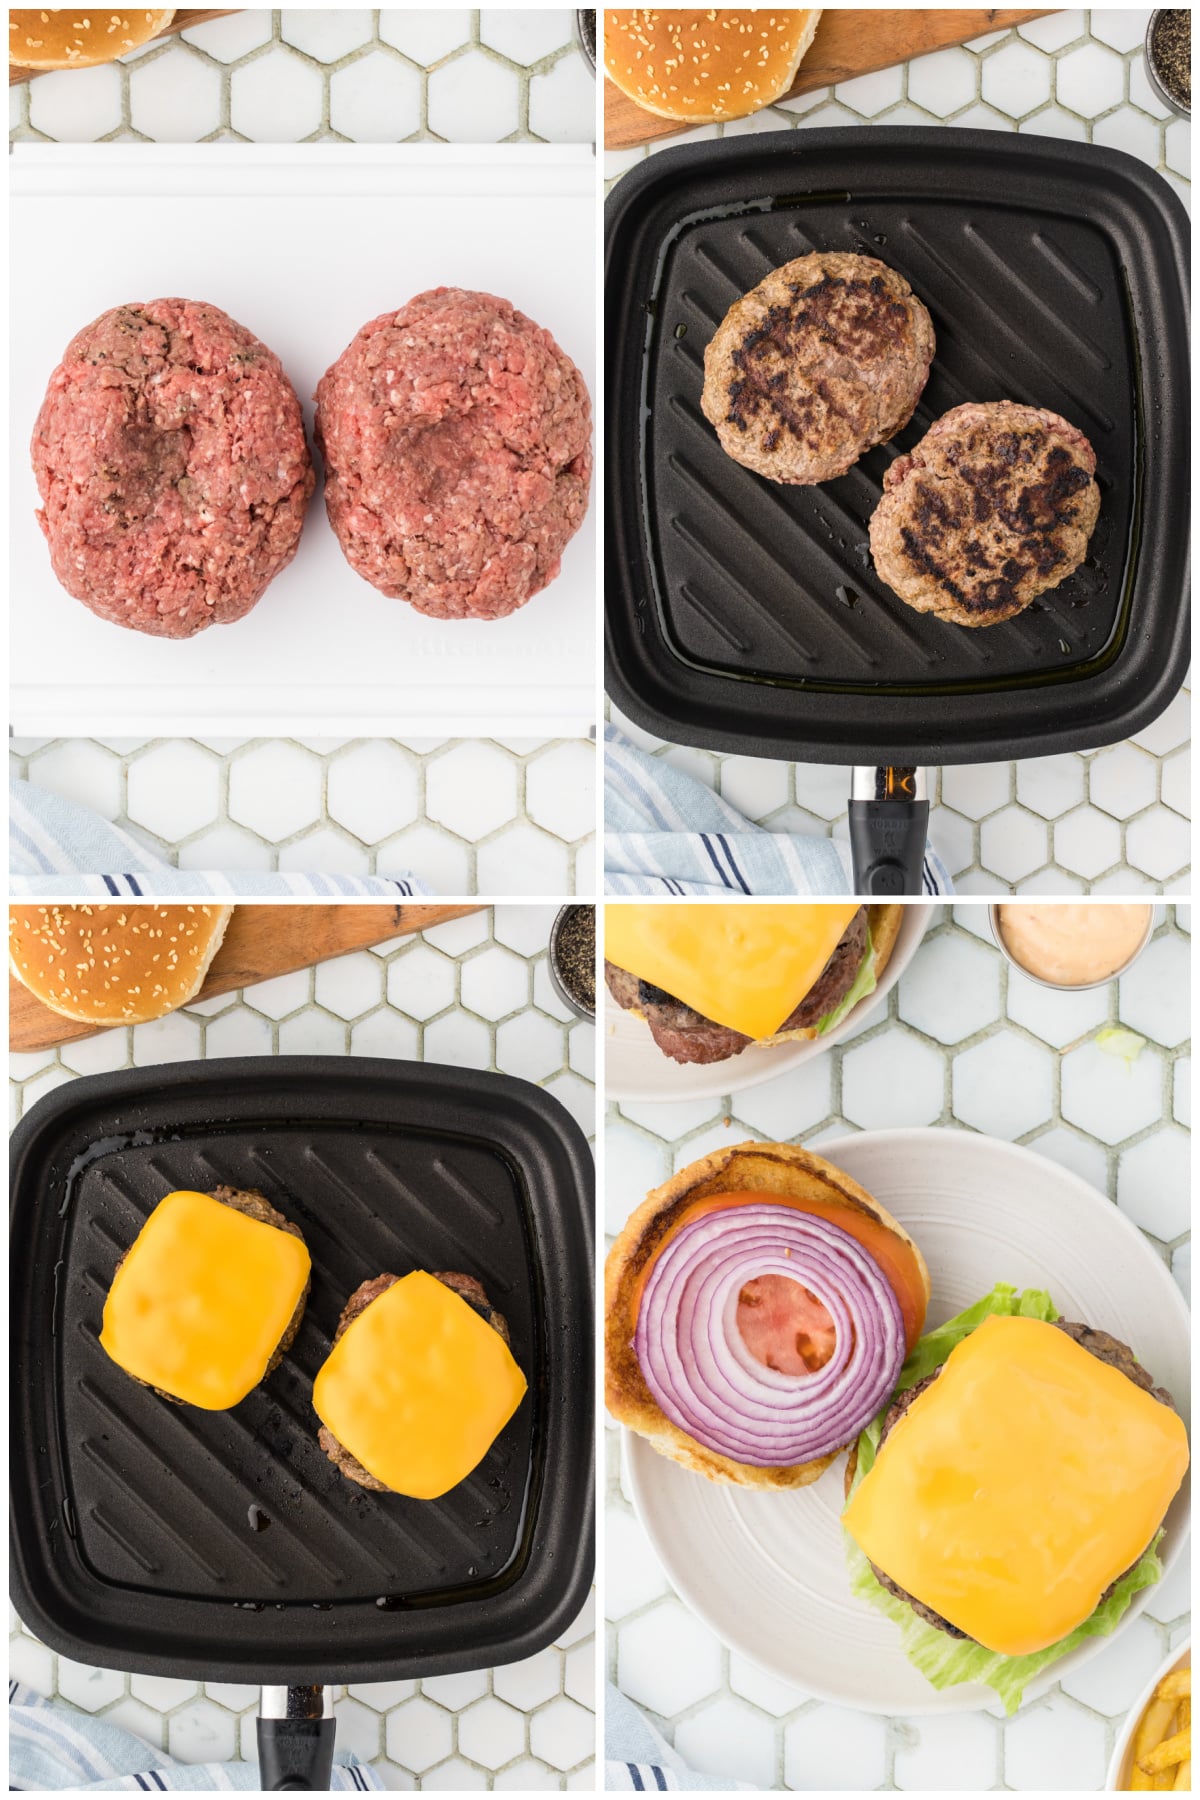 A collage of four images showing how to make the recipe.